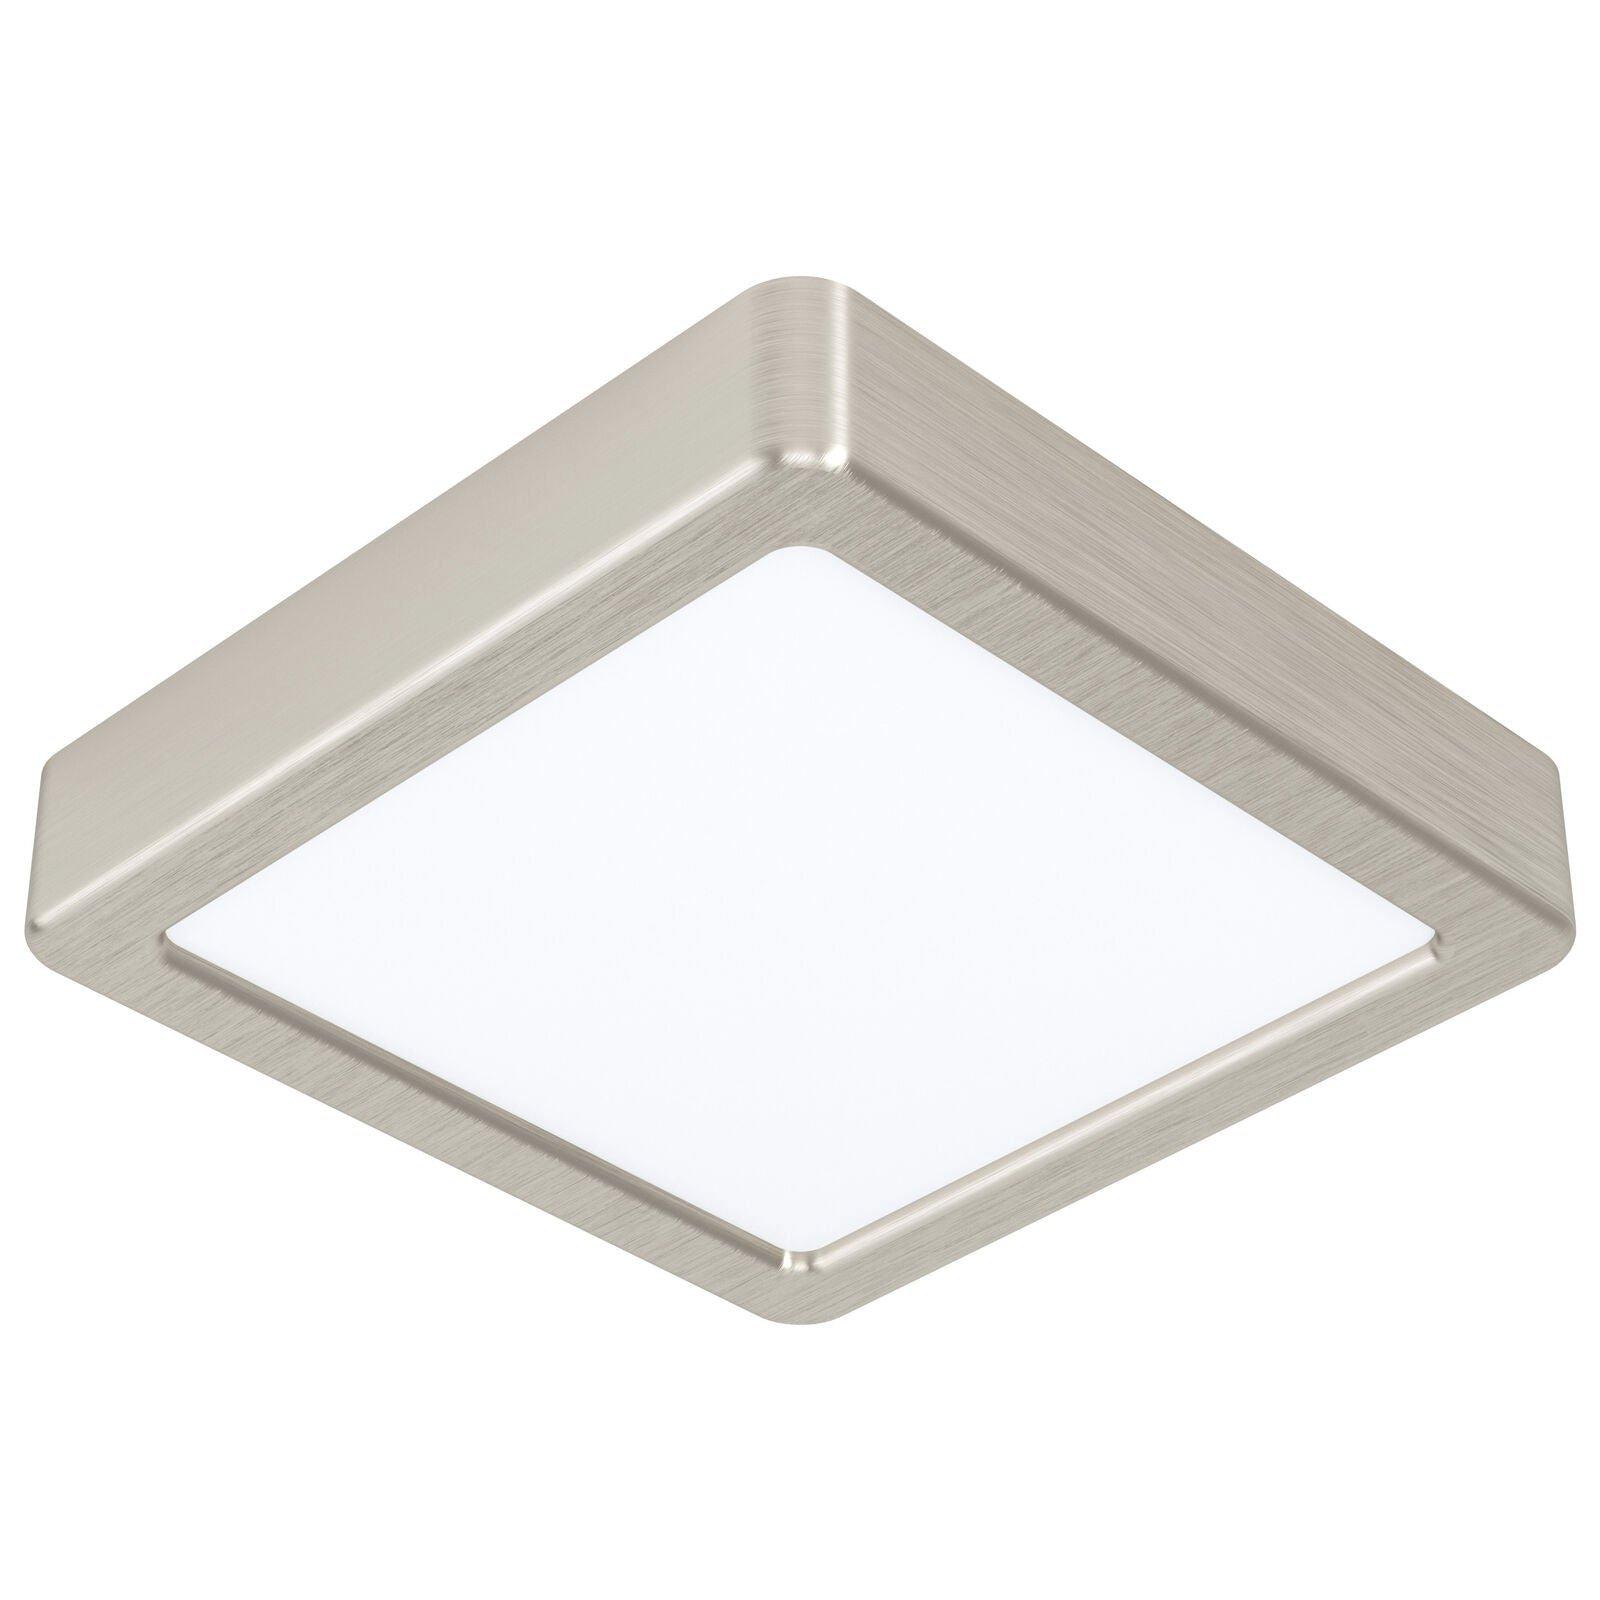 Wall / Ceiling Light Satin Nickel 160mm Sqaure Surface Mounted 10.5W LED 4000K